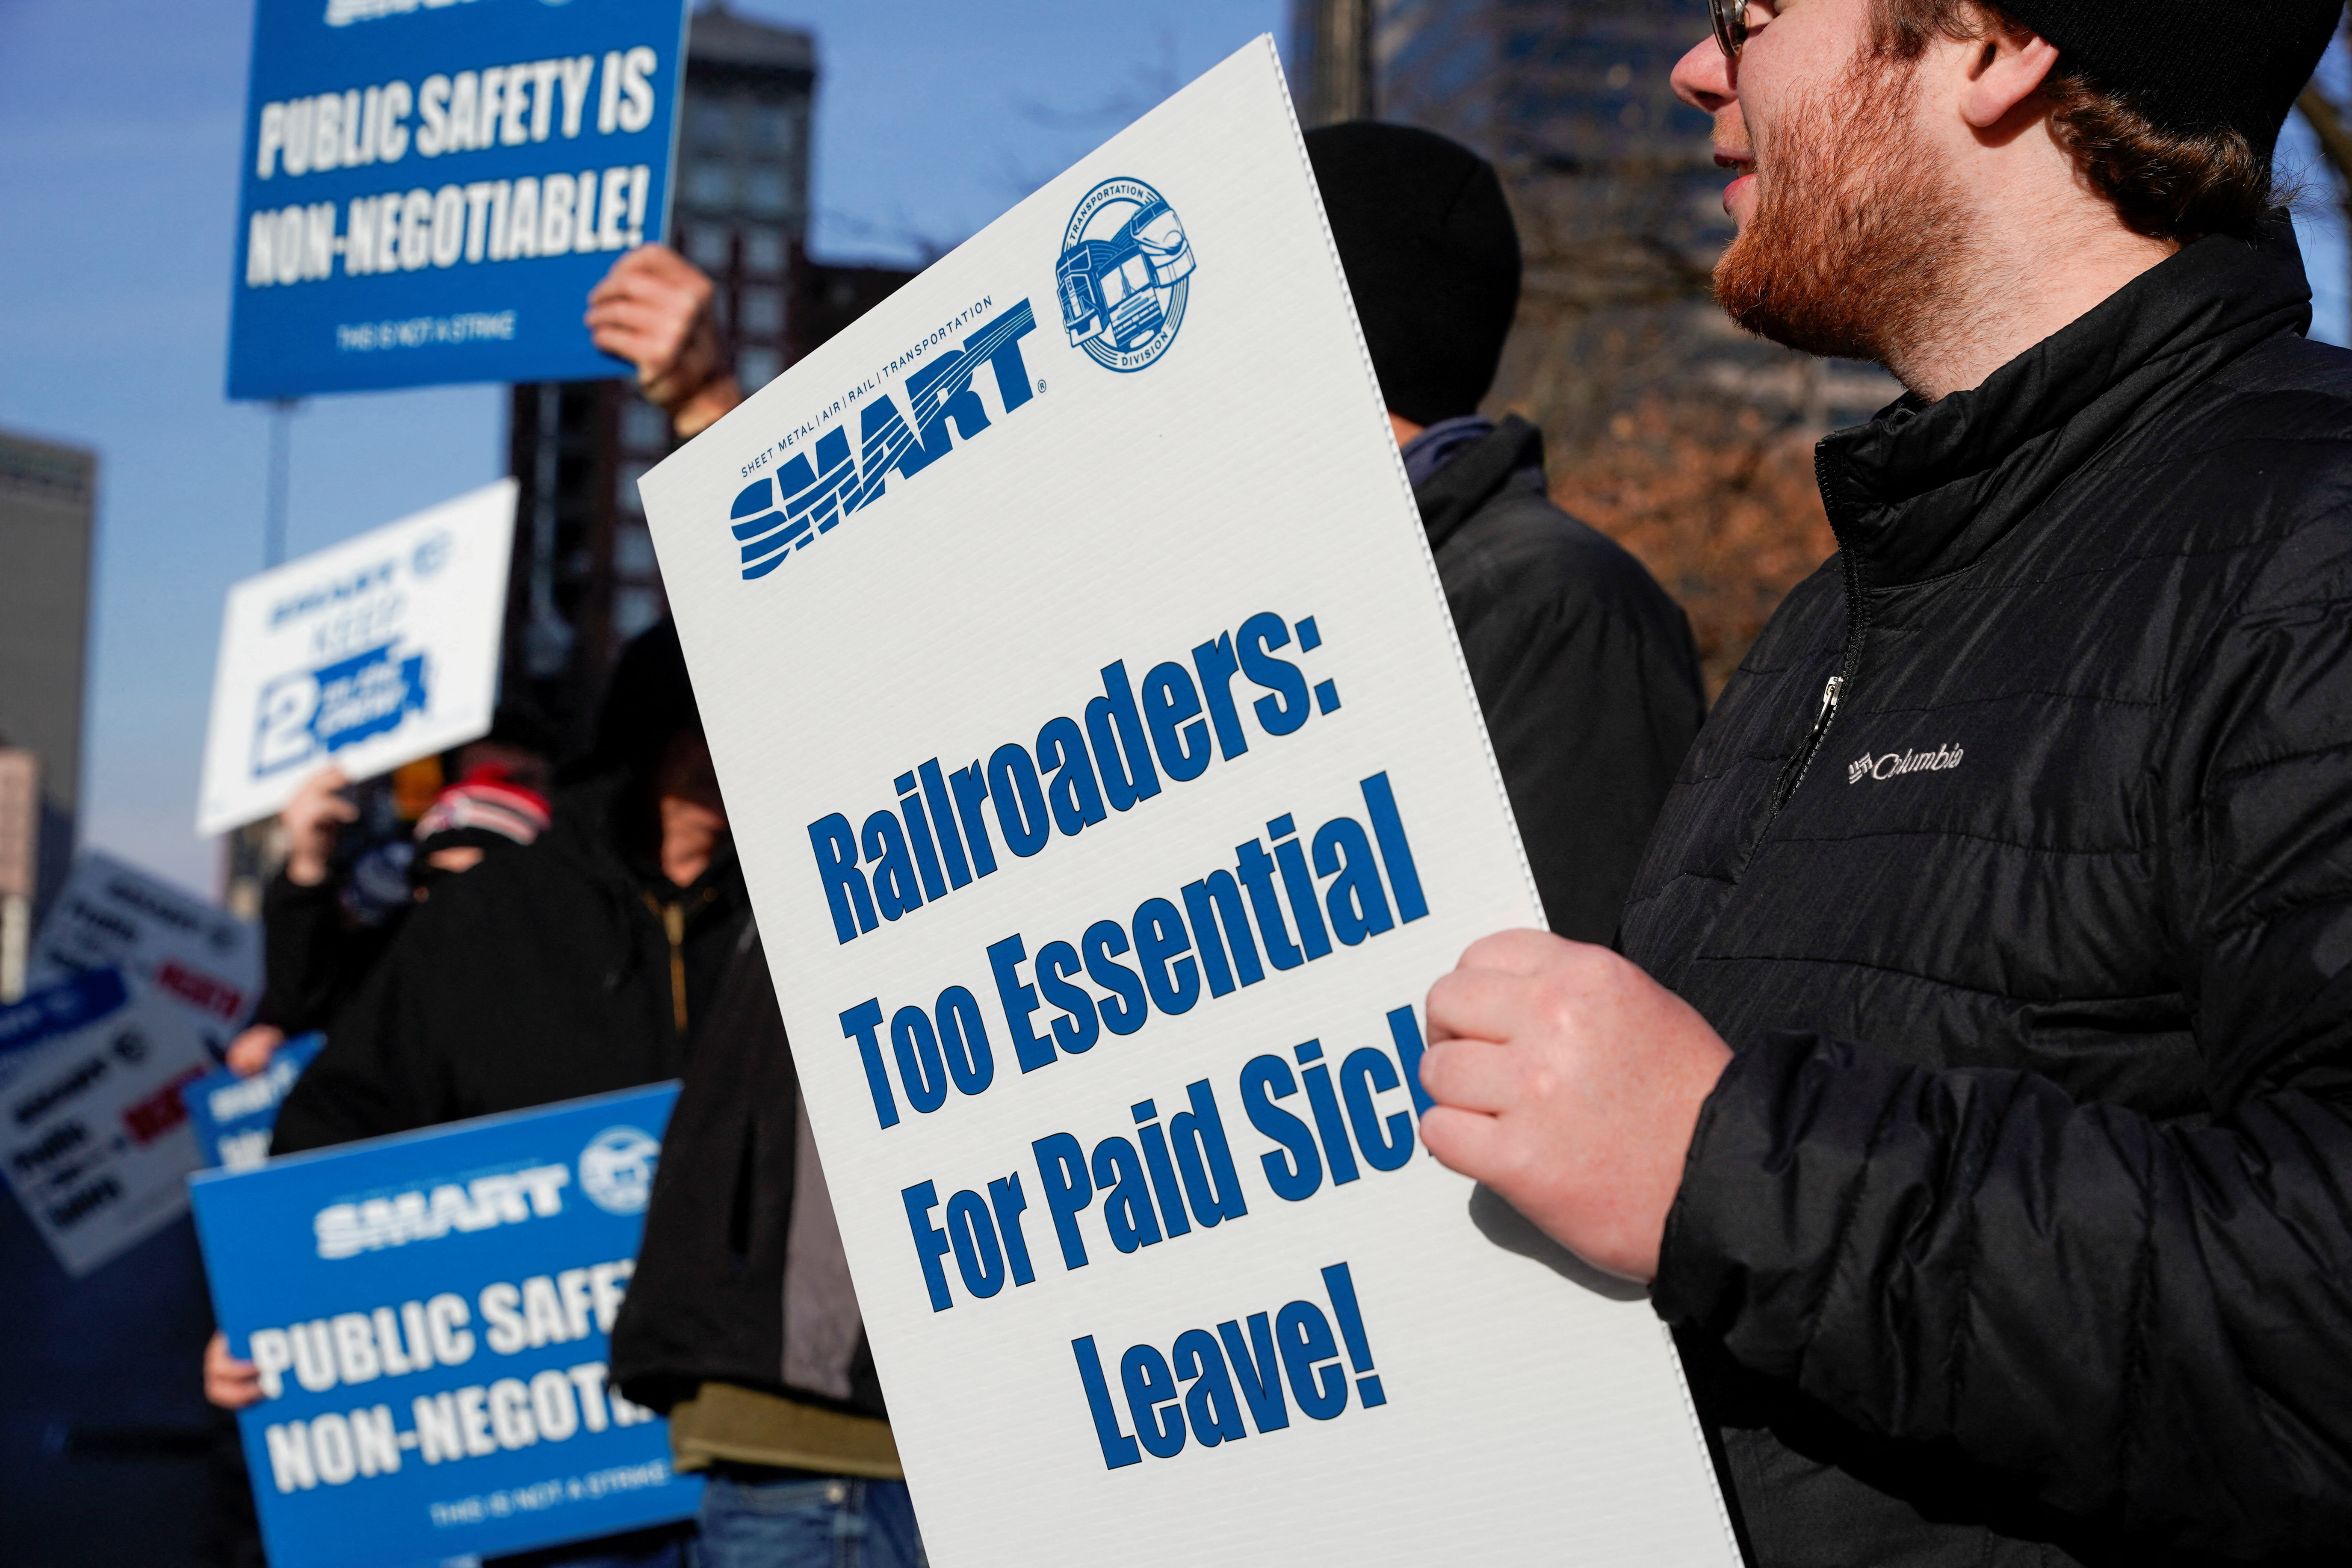 Protesters hold rally in support of rail workers in Columbus